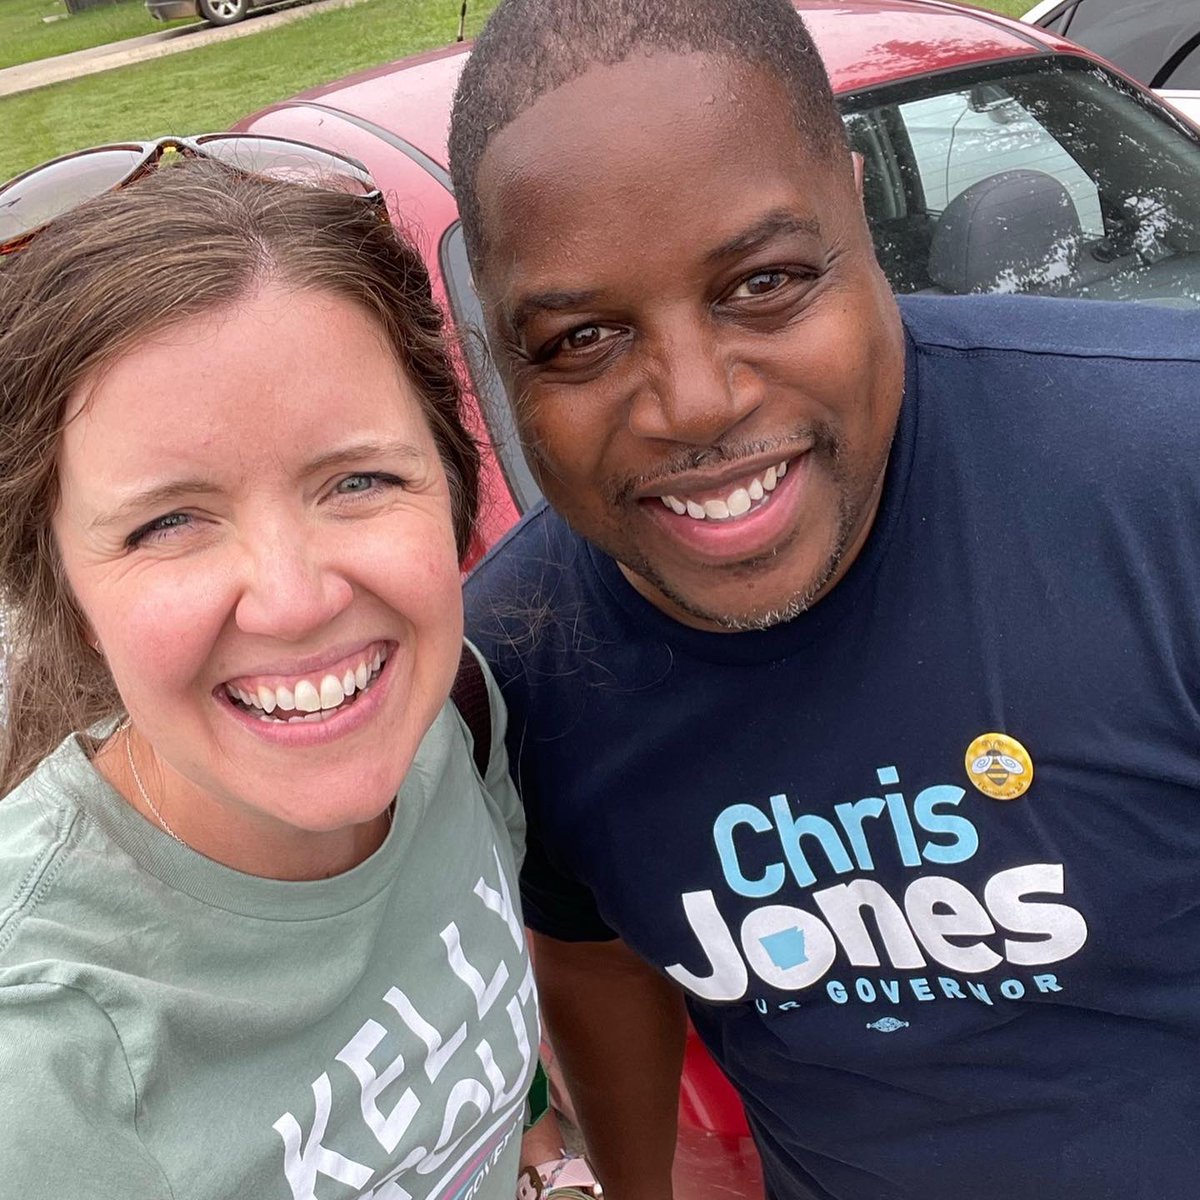 Join @JonesForAR & I to knock some doors in Springdale this afternoon!